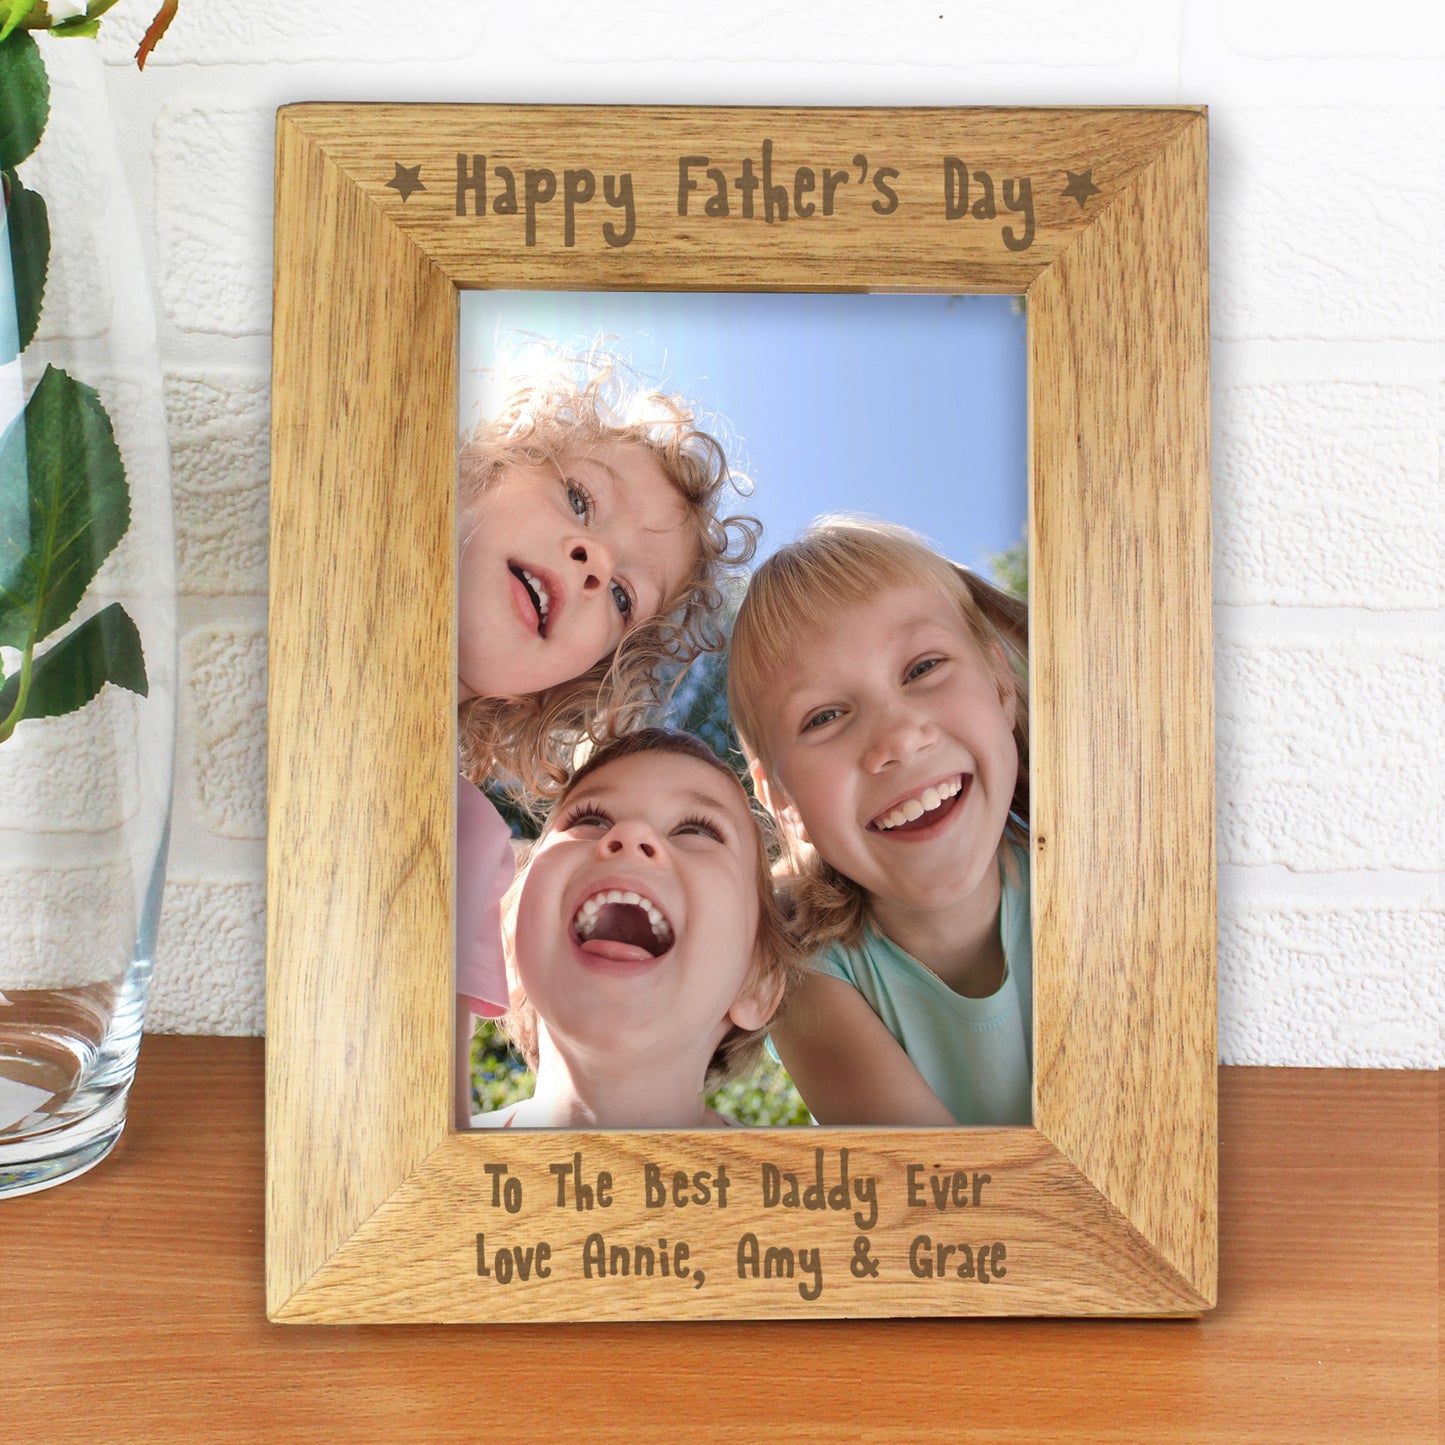 Personalised 'Happy Father's Day' Wooden Photo Frame 5X7